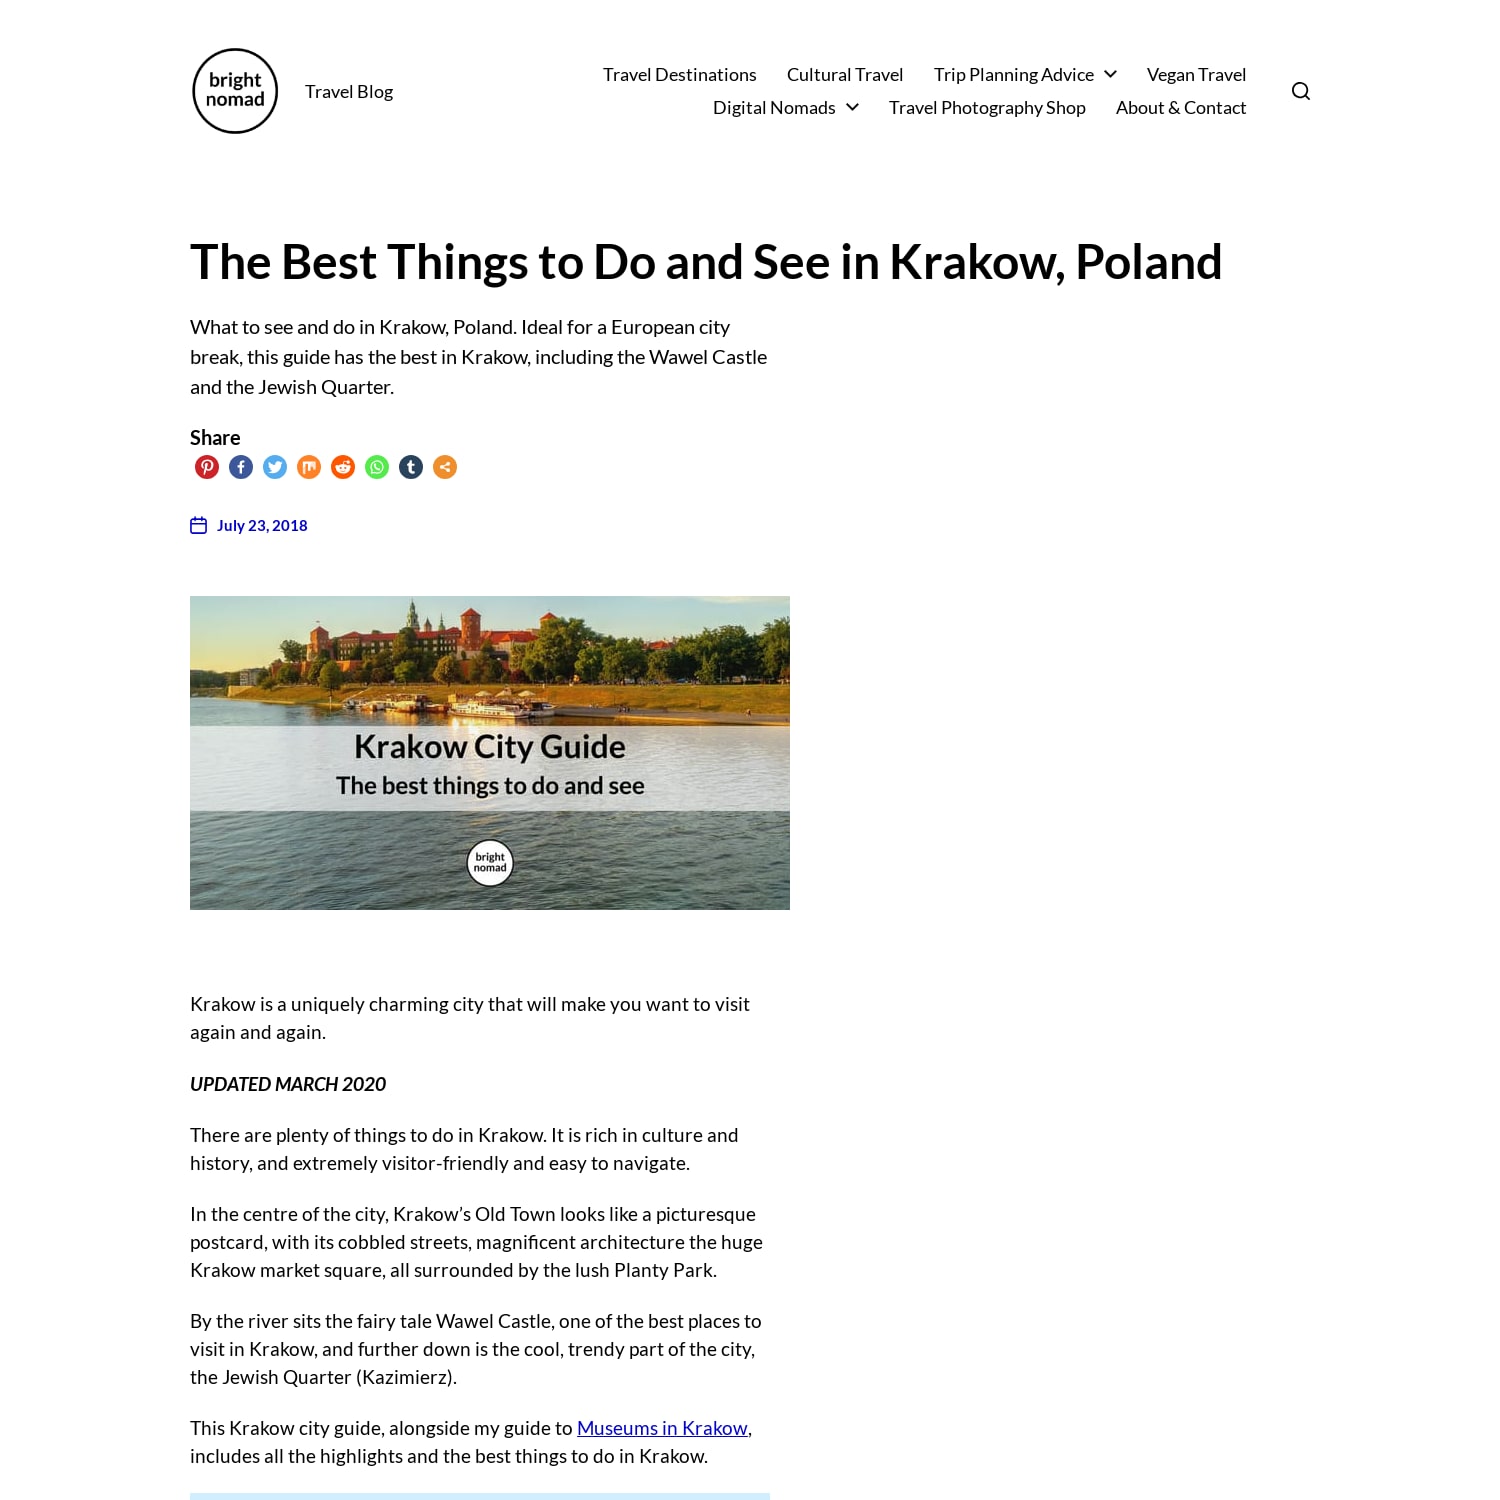 The Best Things to Do and See in Krakow, Poland - City Guide